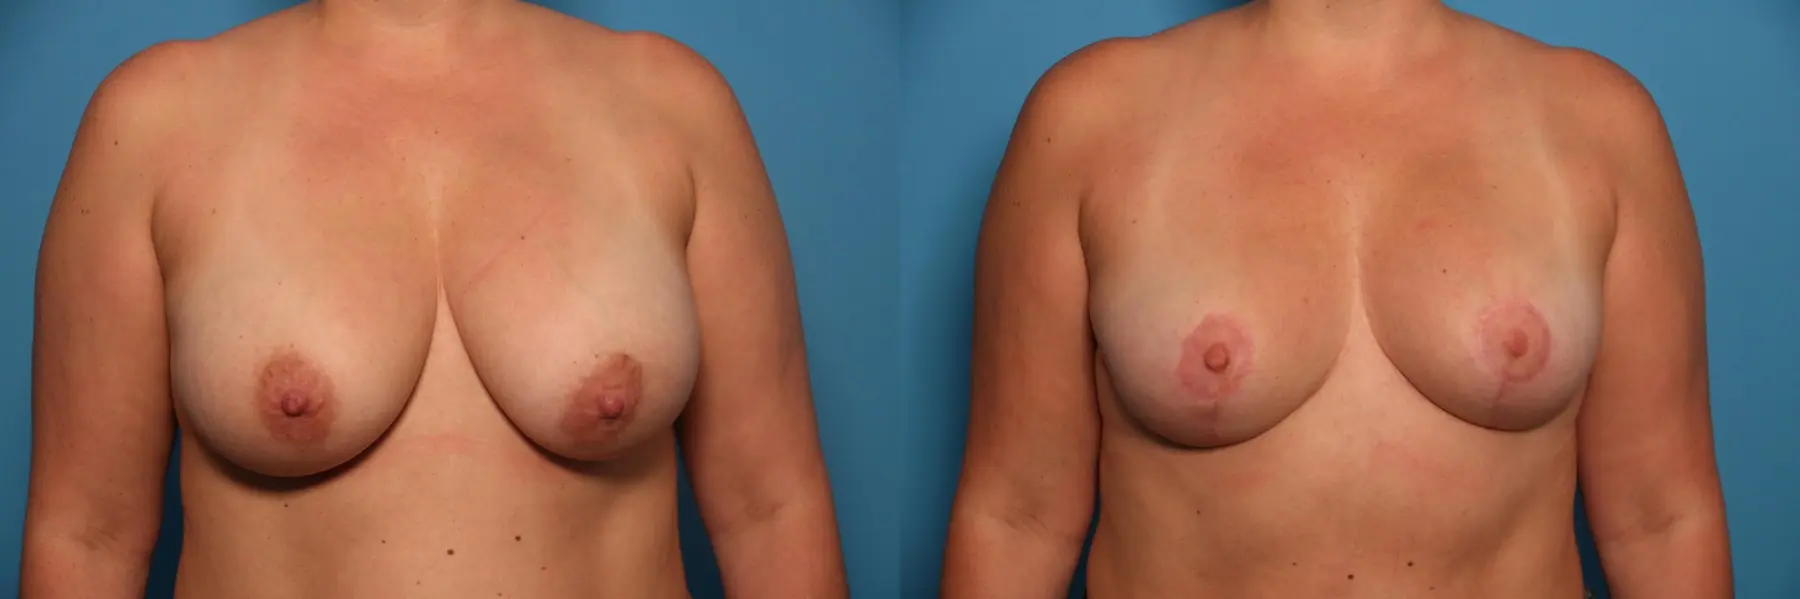 Breast Lift-Reduction: Patient 5 - Before and After  